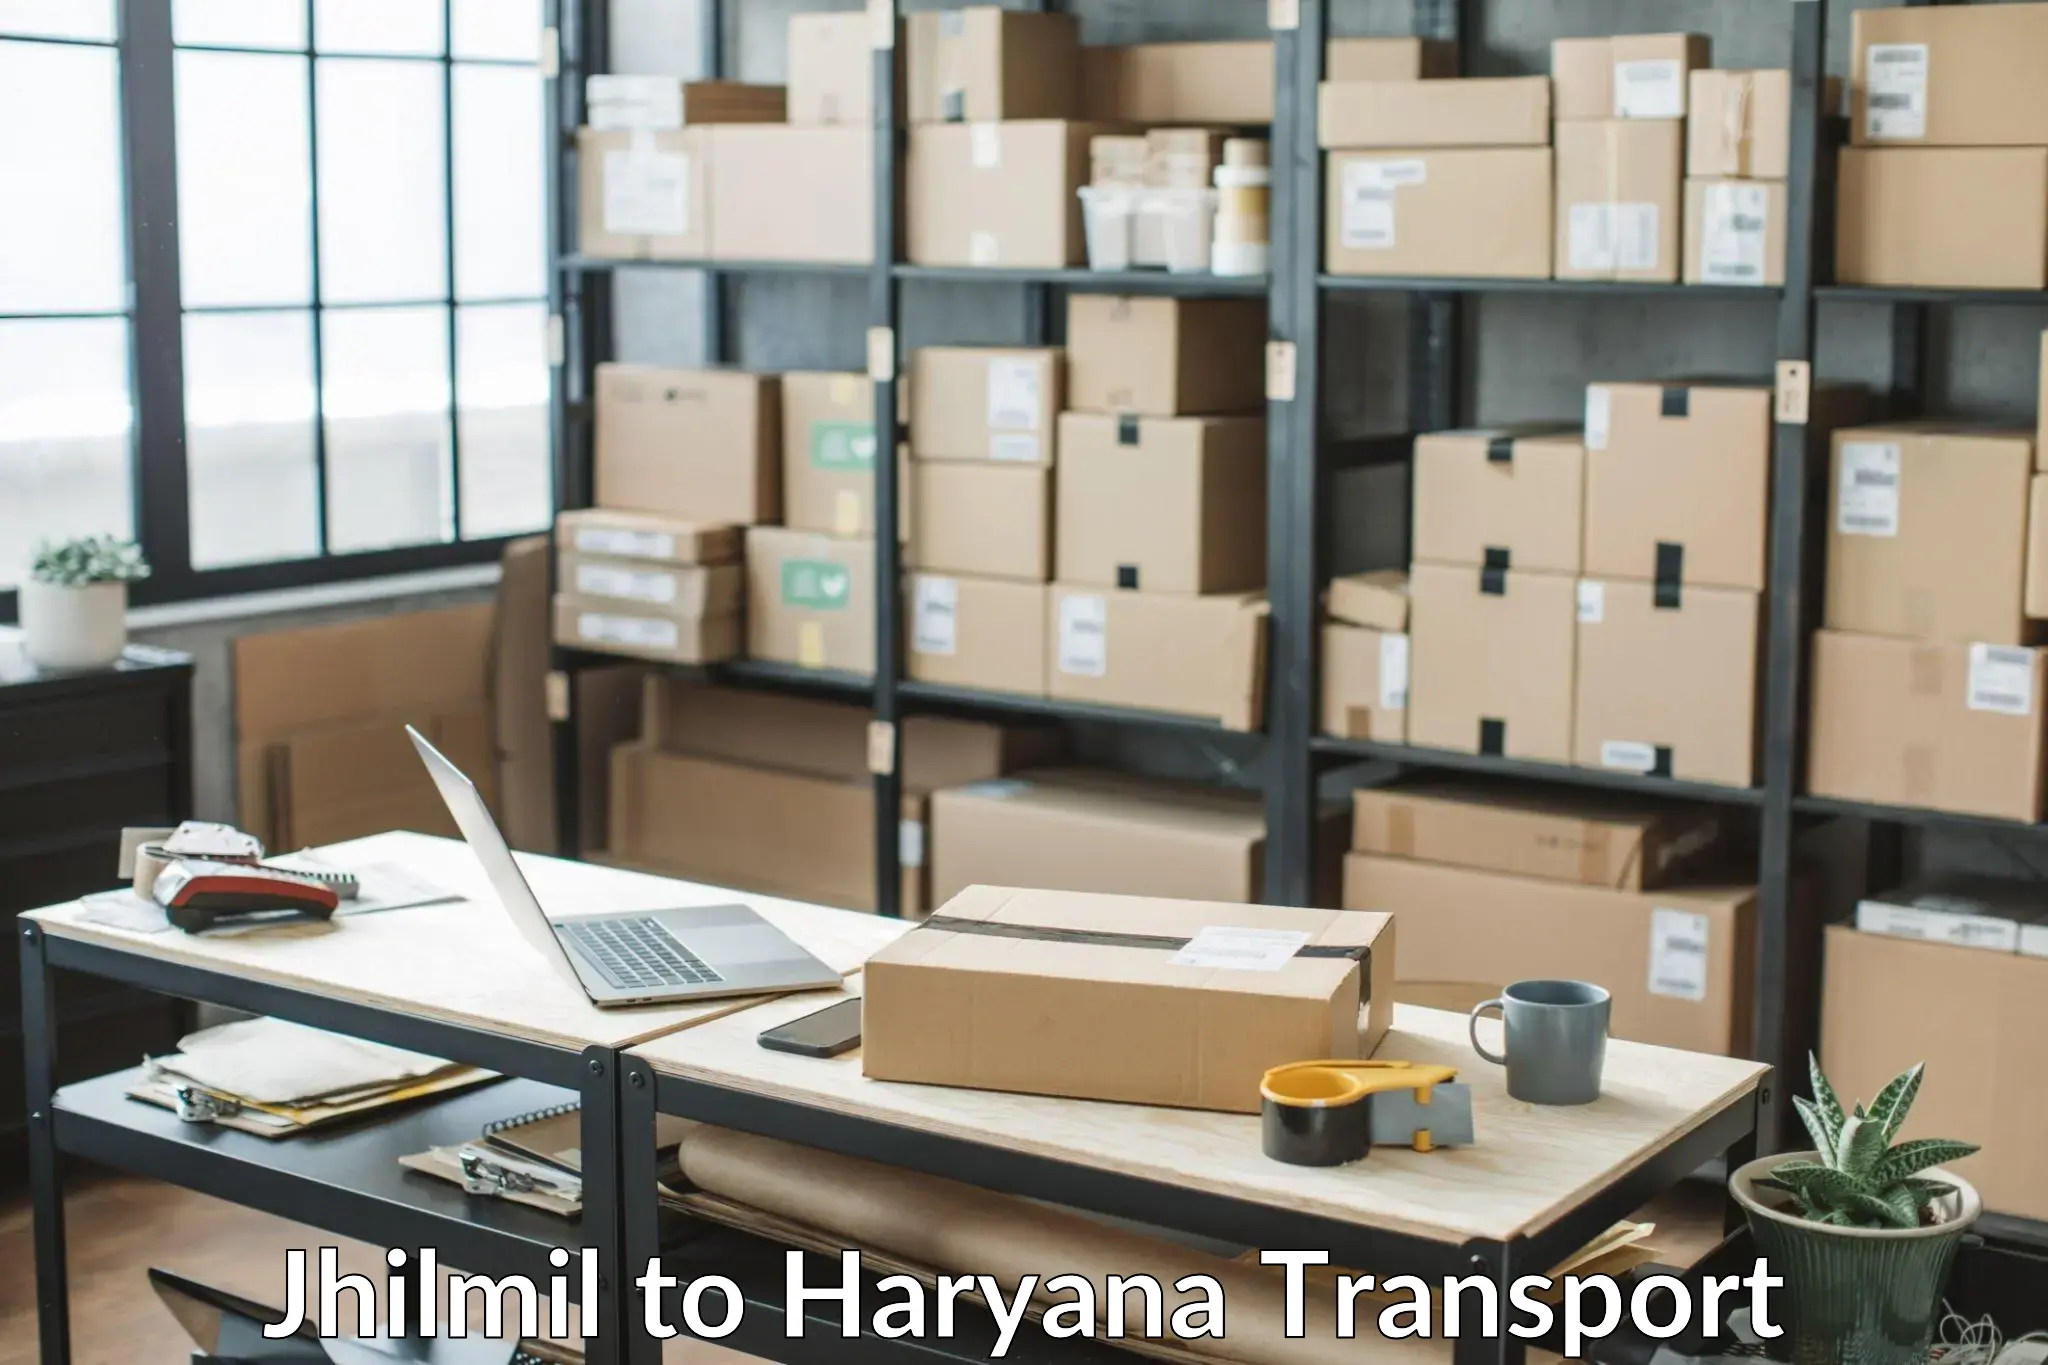 Express transport services Jhilmil to Bilaspur Haryana